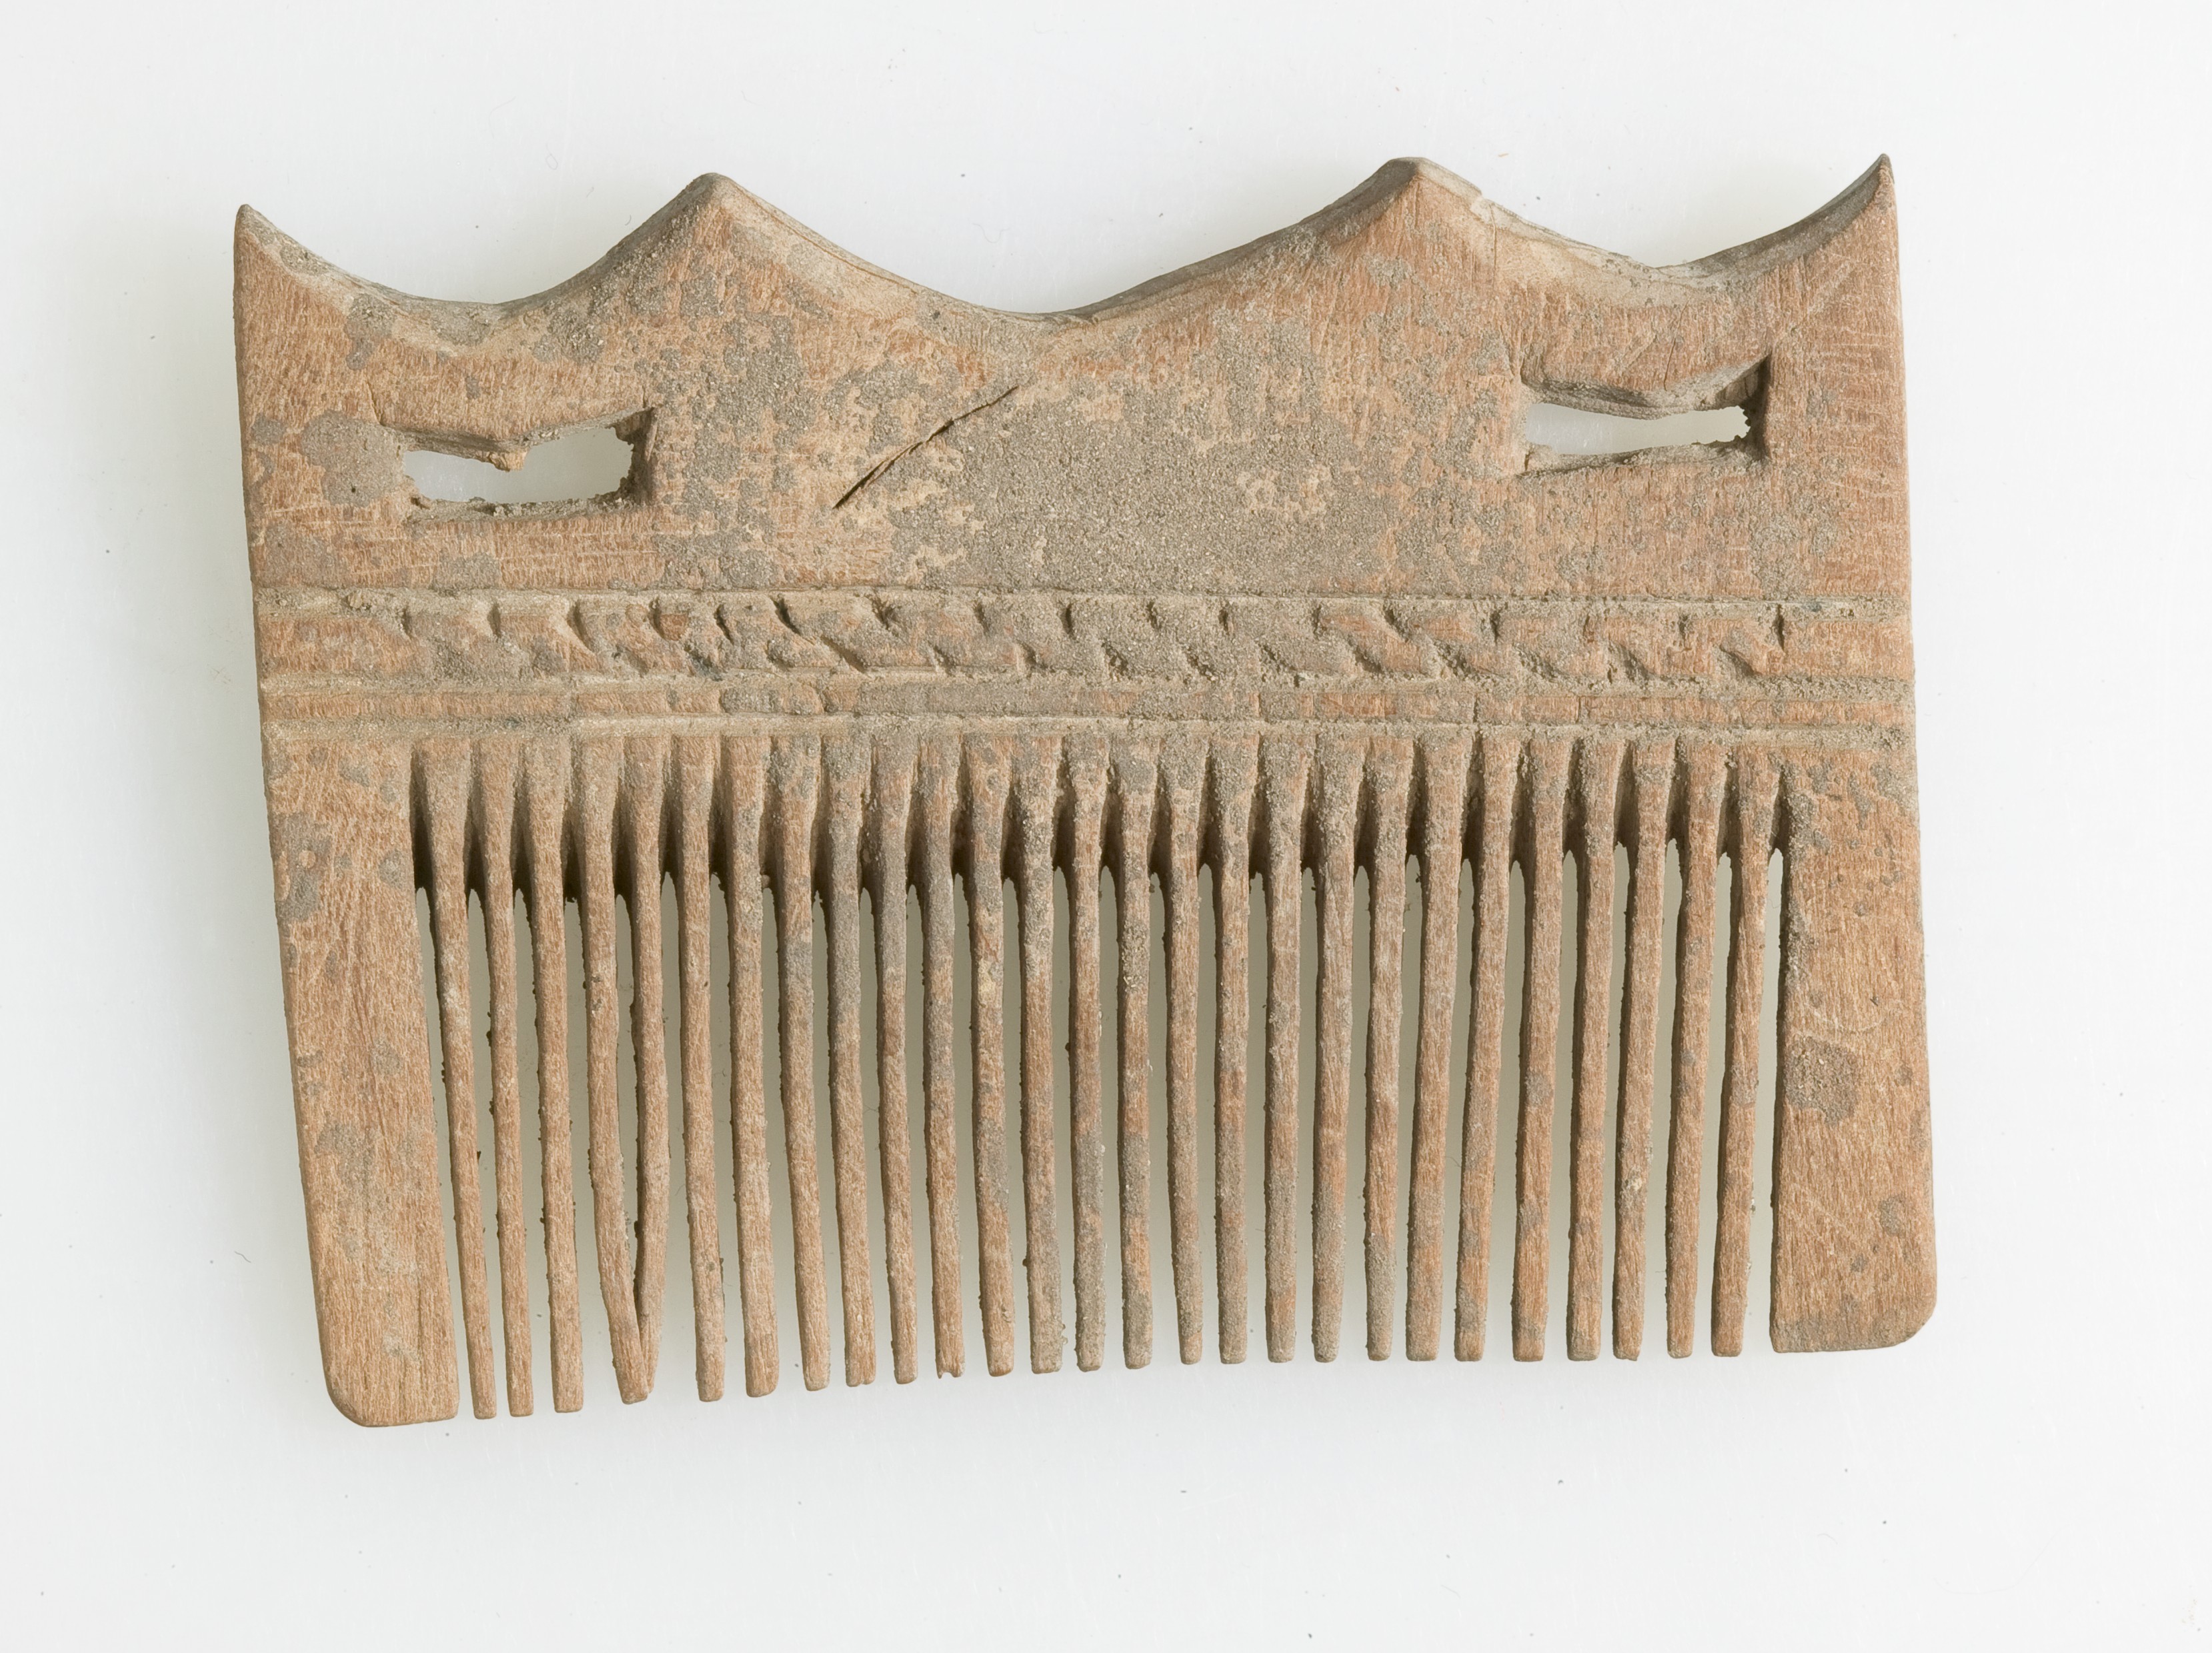 Comb | Middle Kingdom | The Met